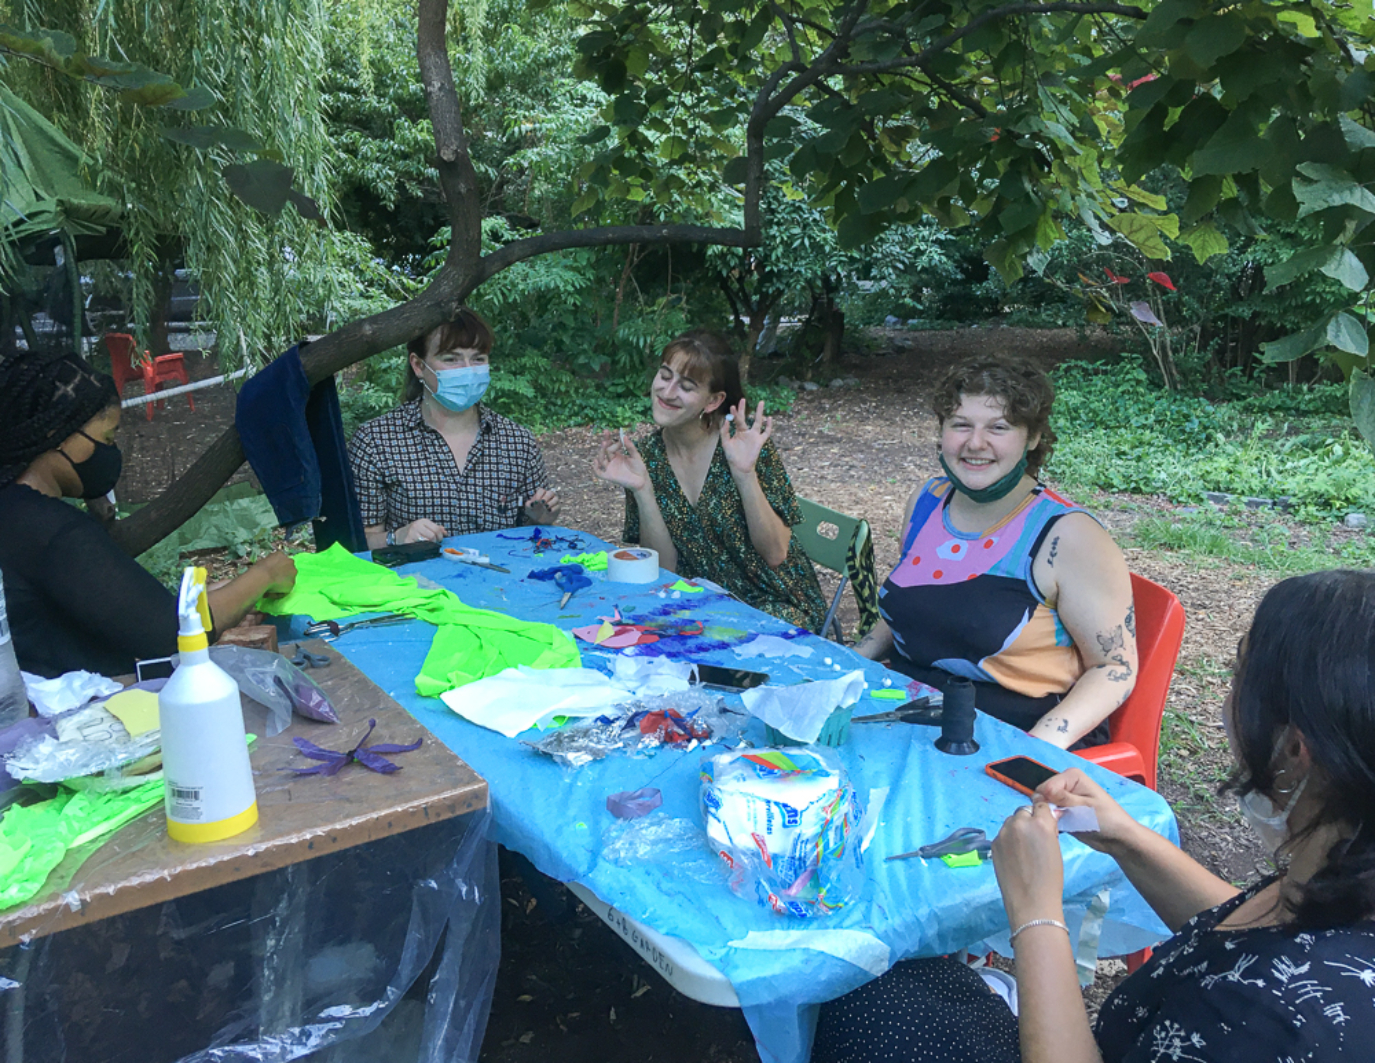 Five volunteers sit around a blue table with paints and materials, smiling and posing for the camera. Some are masked. There are trees and nature surround them. This is the NYC event. Colors on the table include green, white, red, and black